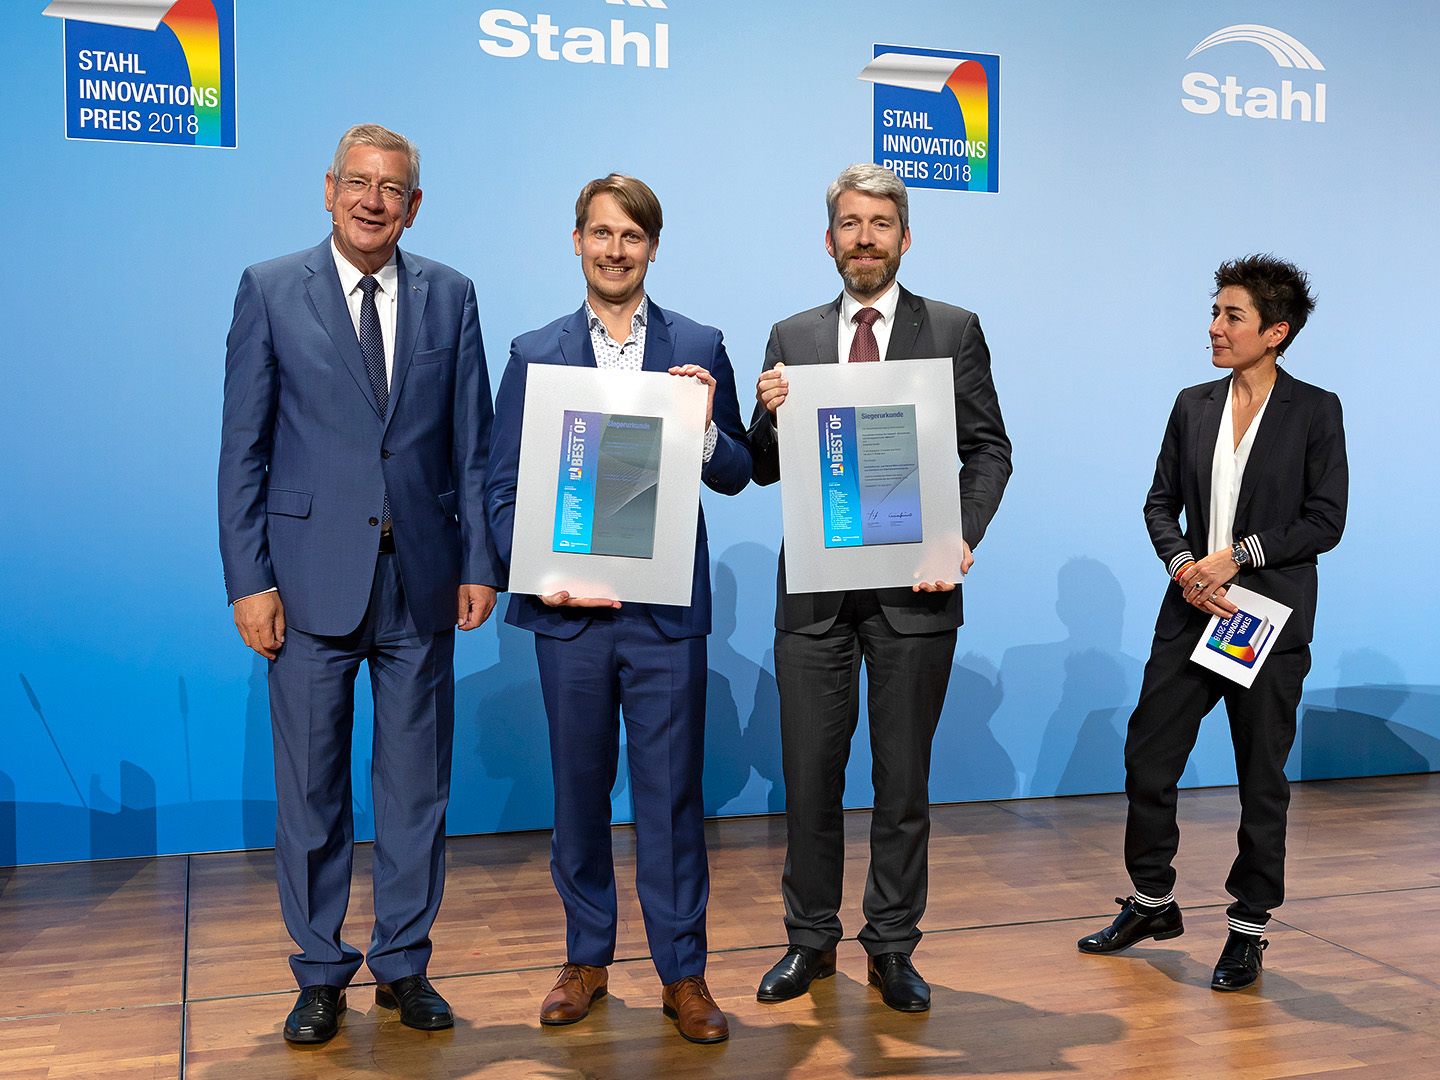 Dr. Johannes Grob (2nd from left), Executive Board of TURBONIK GmbH, and Prof. Christian Doetsch, Head of the Energy Division at Fraunhofer UMSICHT, accepted the Stahl-Innovationspreis 2018.